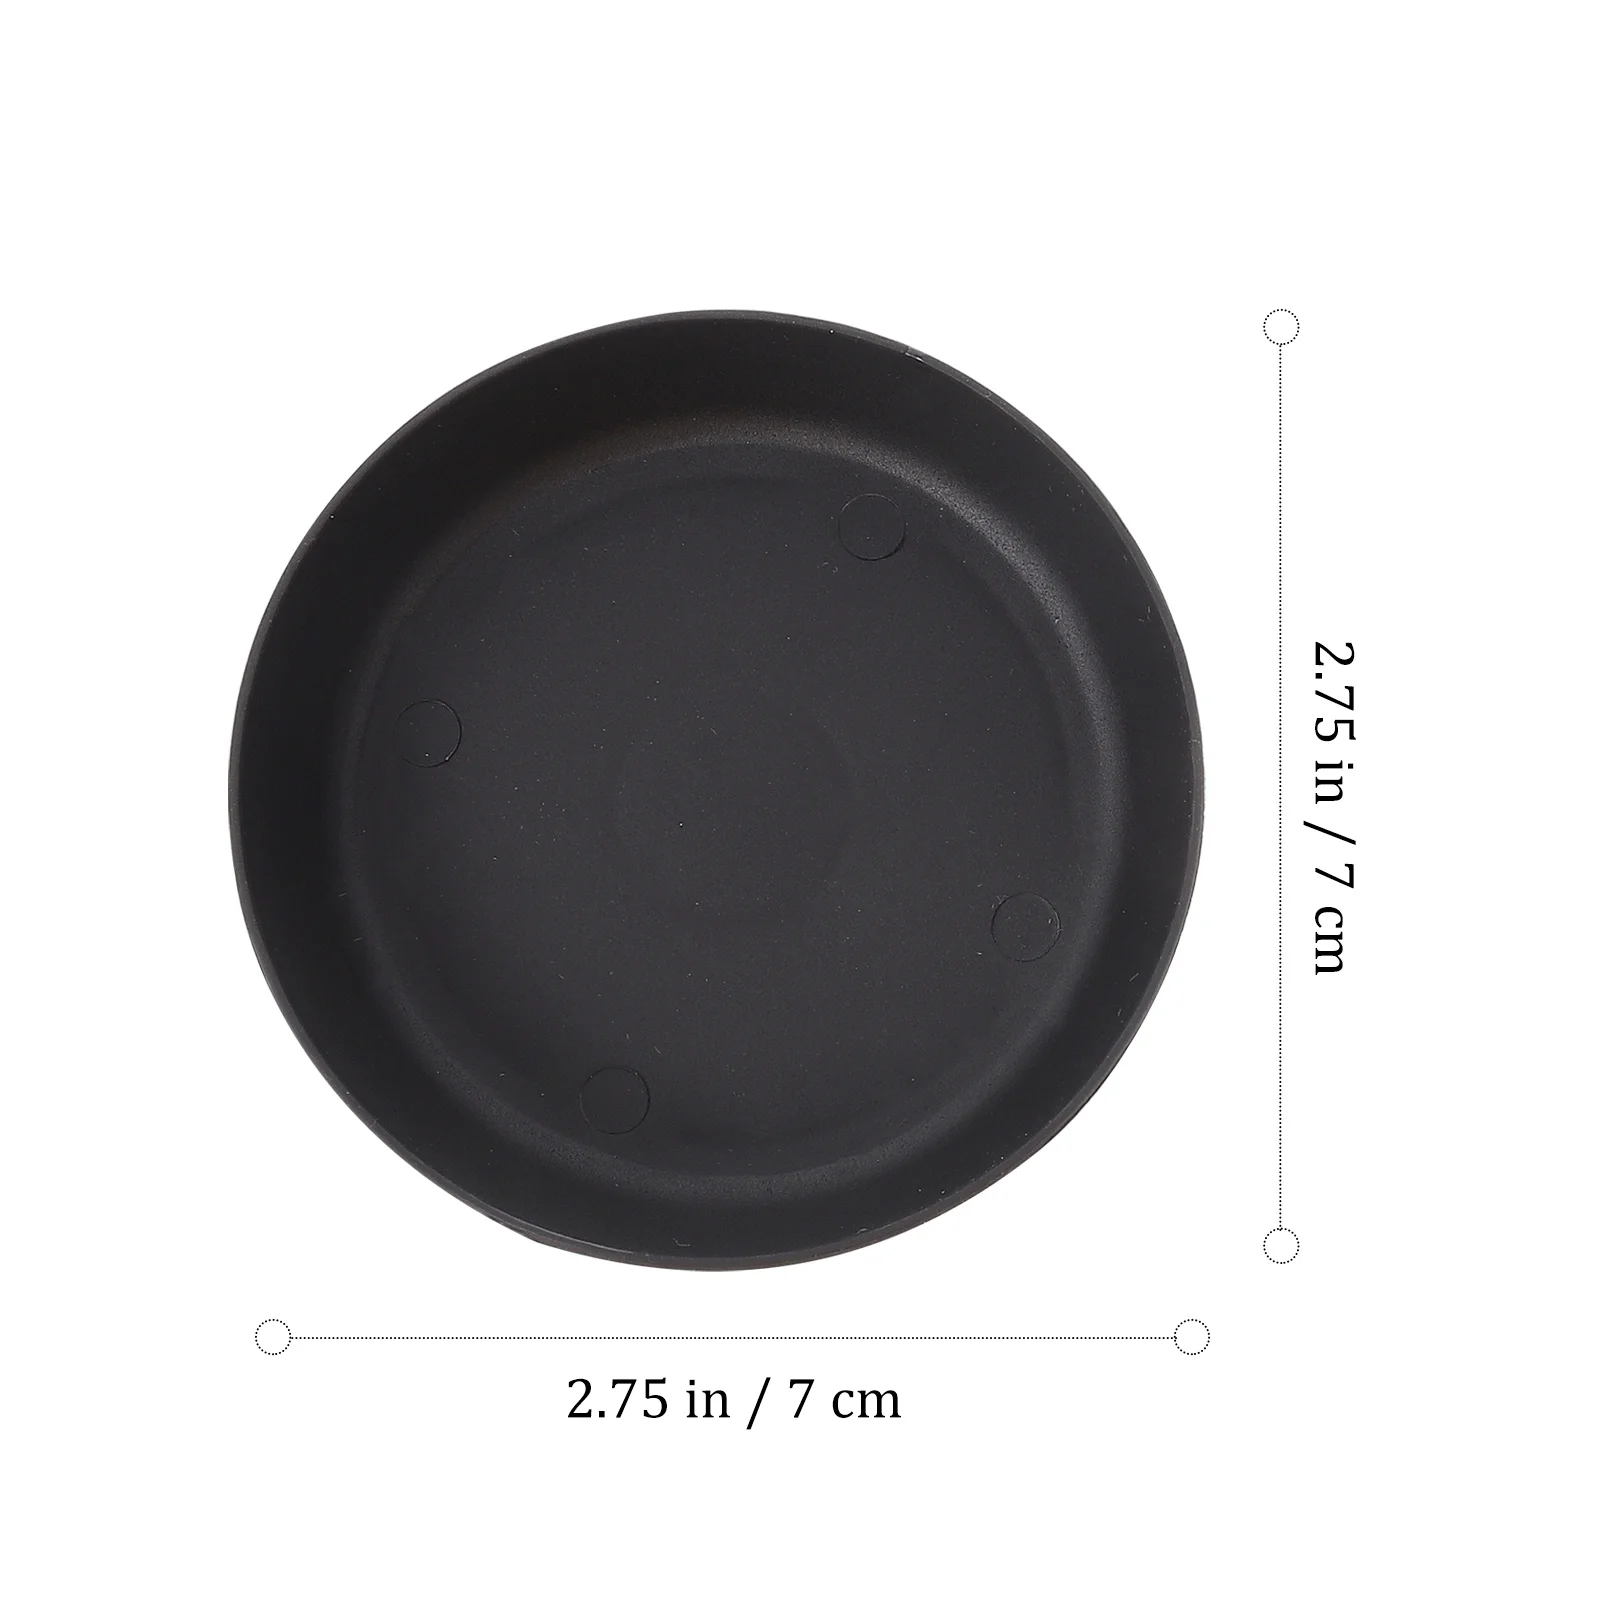 30pcs Flower Water Tray Drip Trays Saucers Planter Trays Round Flower Pot Drip Pans Dishes Plates Black White 7cm